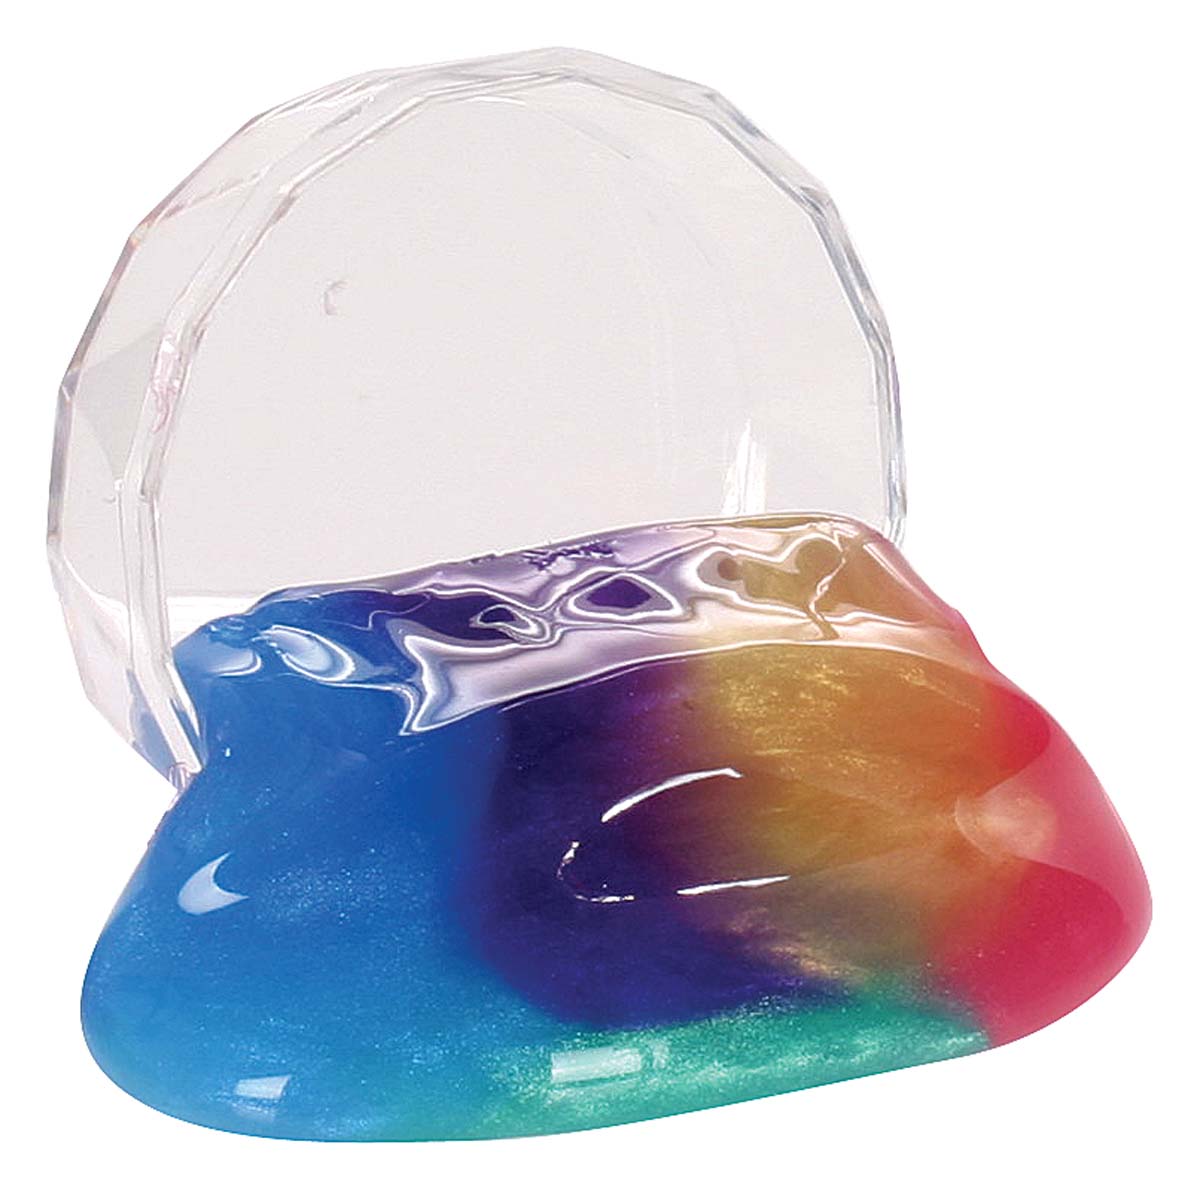 Gooey putty in vivid, swirling colors pouring out of gemstone shaped container